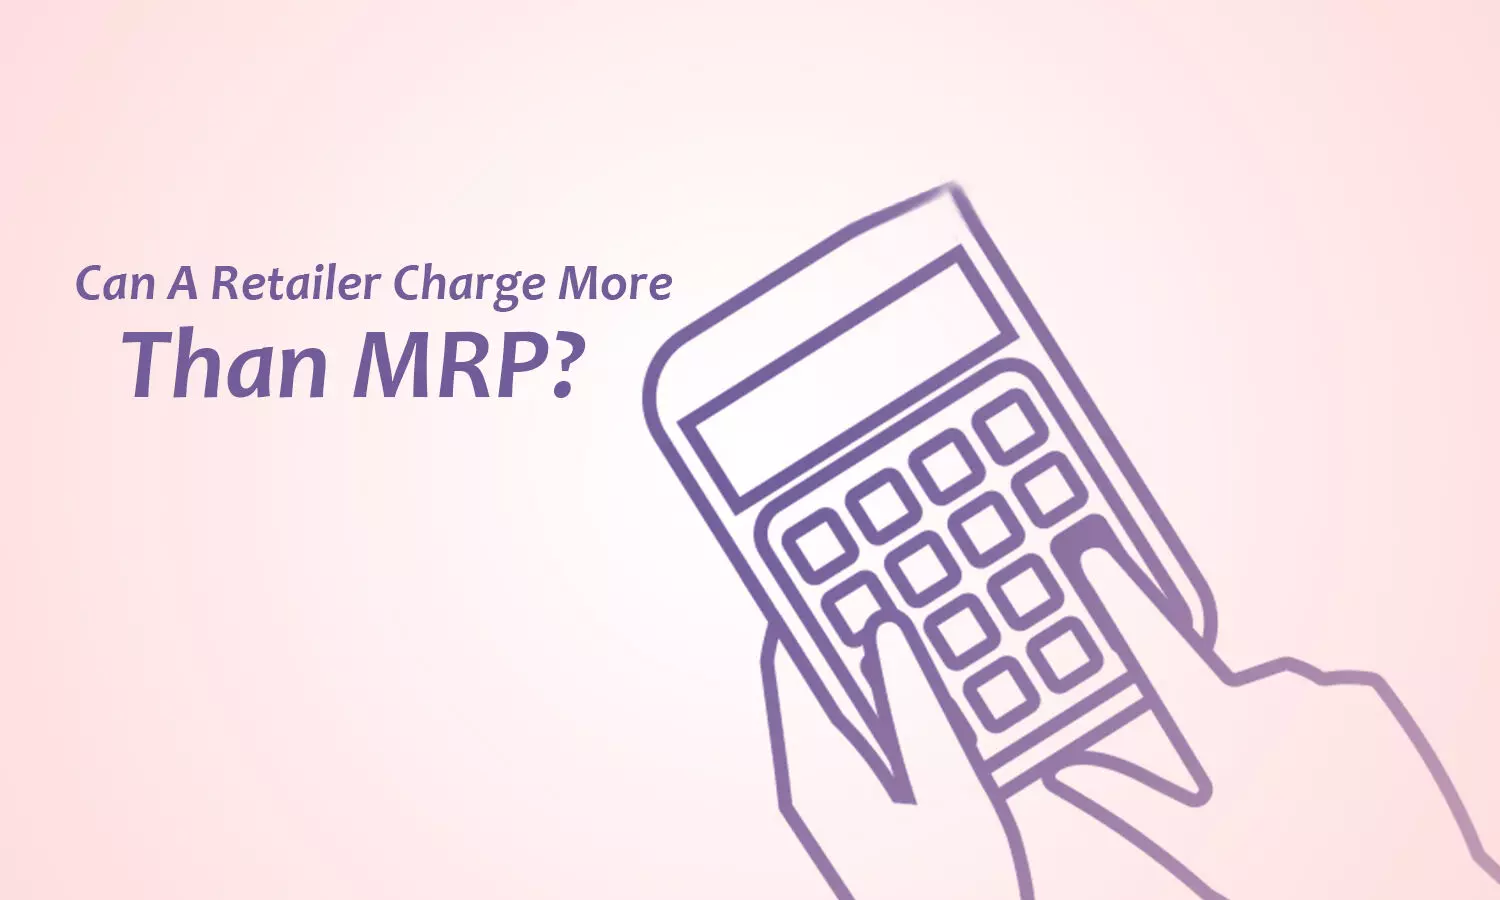 Can A Retailer Charge More Than MRP?